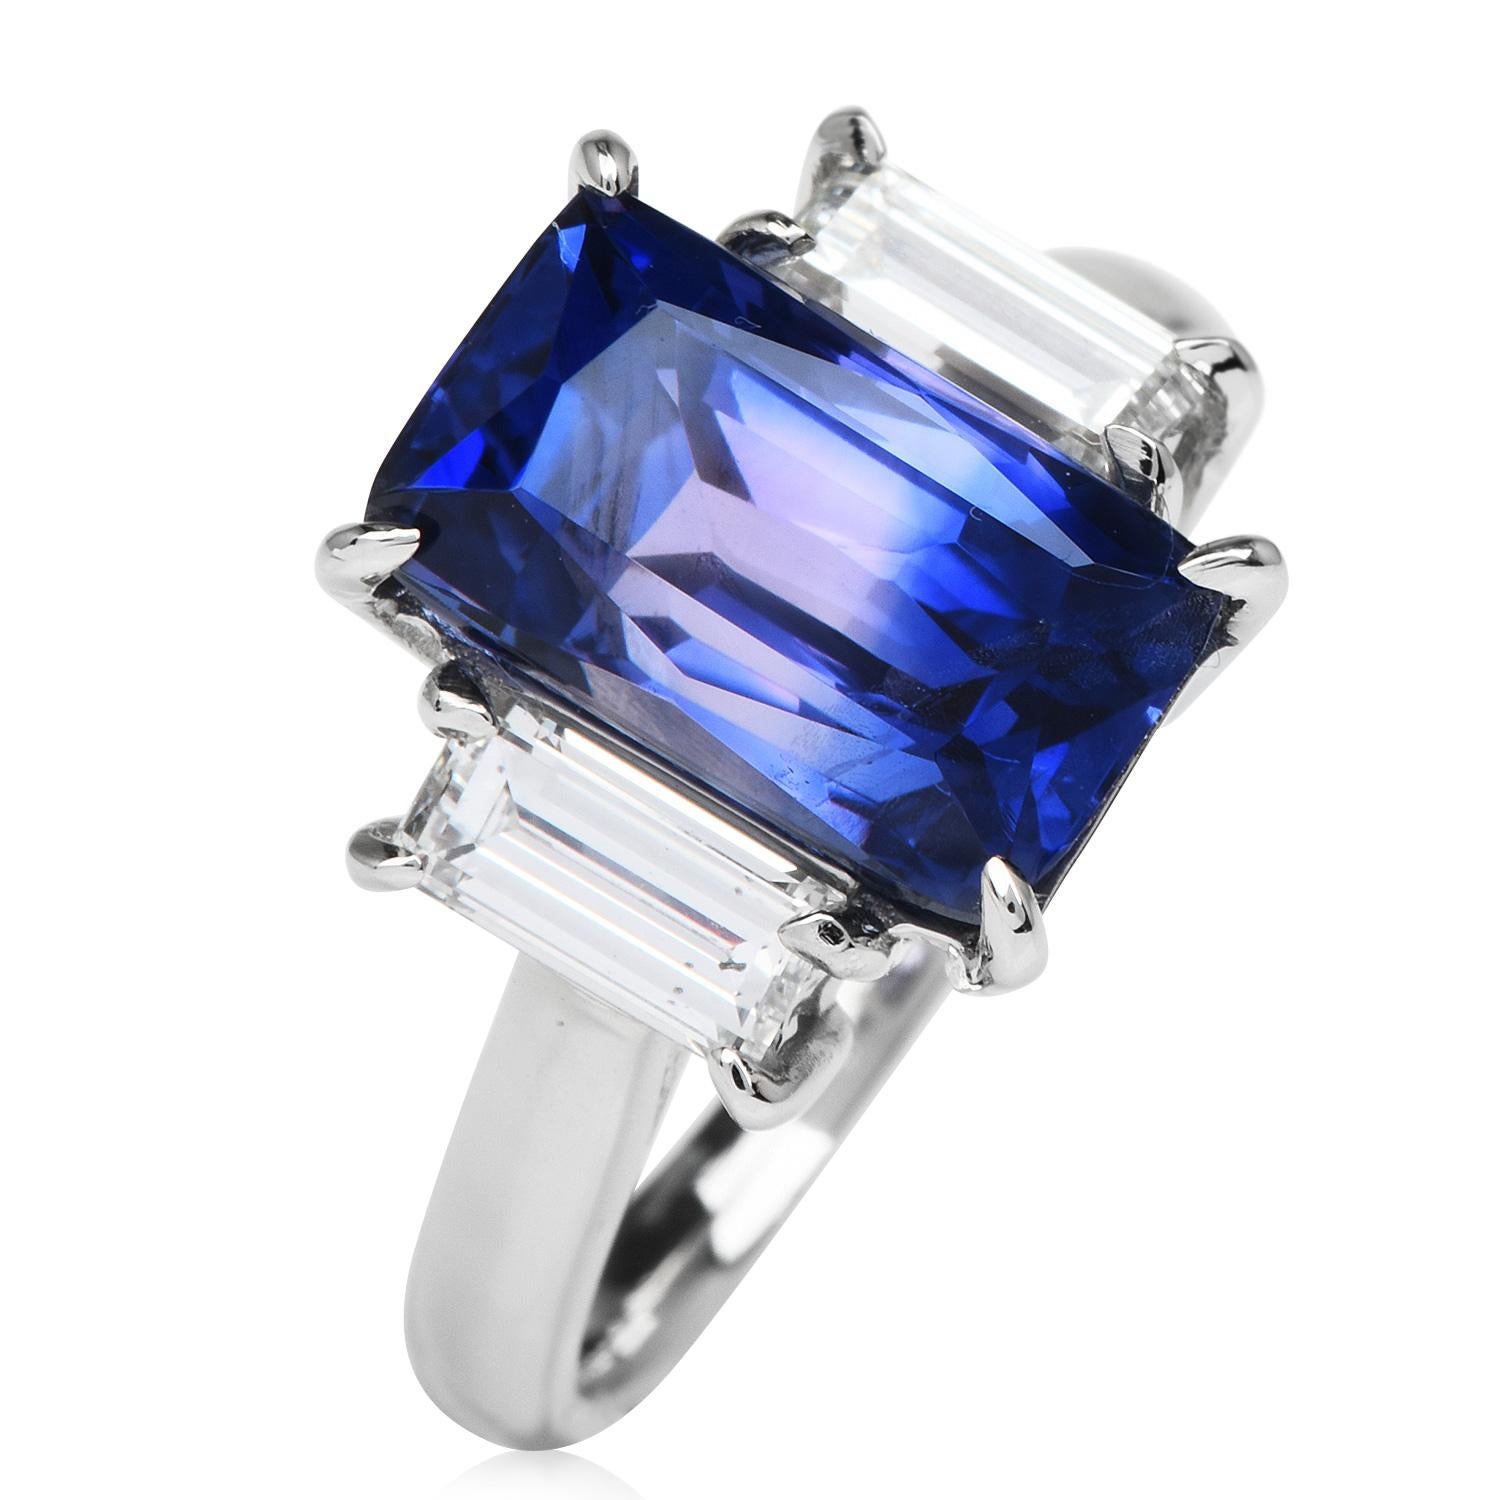 Want to Get Engaged?  Modern not your Style?

This Classic GIA Natural No Heat Ceylon Sapphire and Diamond Three Stone Engagement Ring boast beauty with an approximate total weight of 8.4 grams. 

Expertly crafted in solid Platinum, Featuring